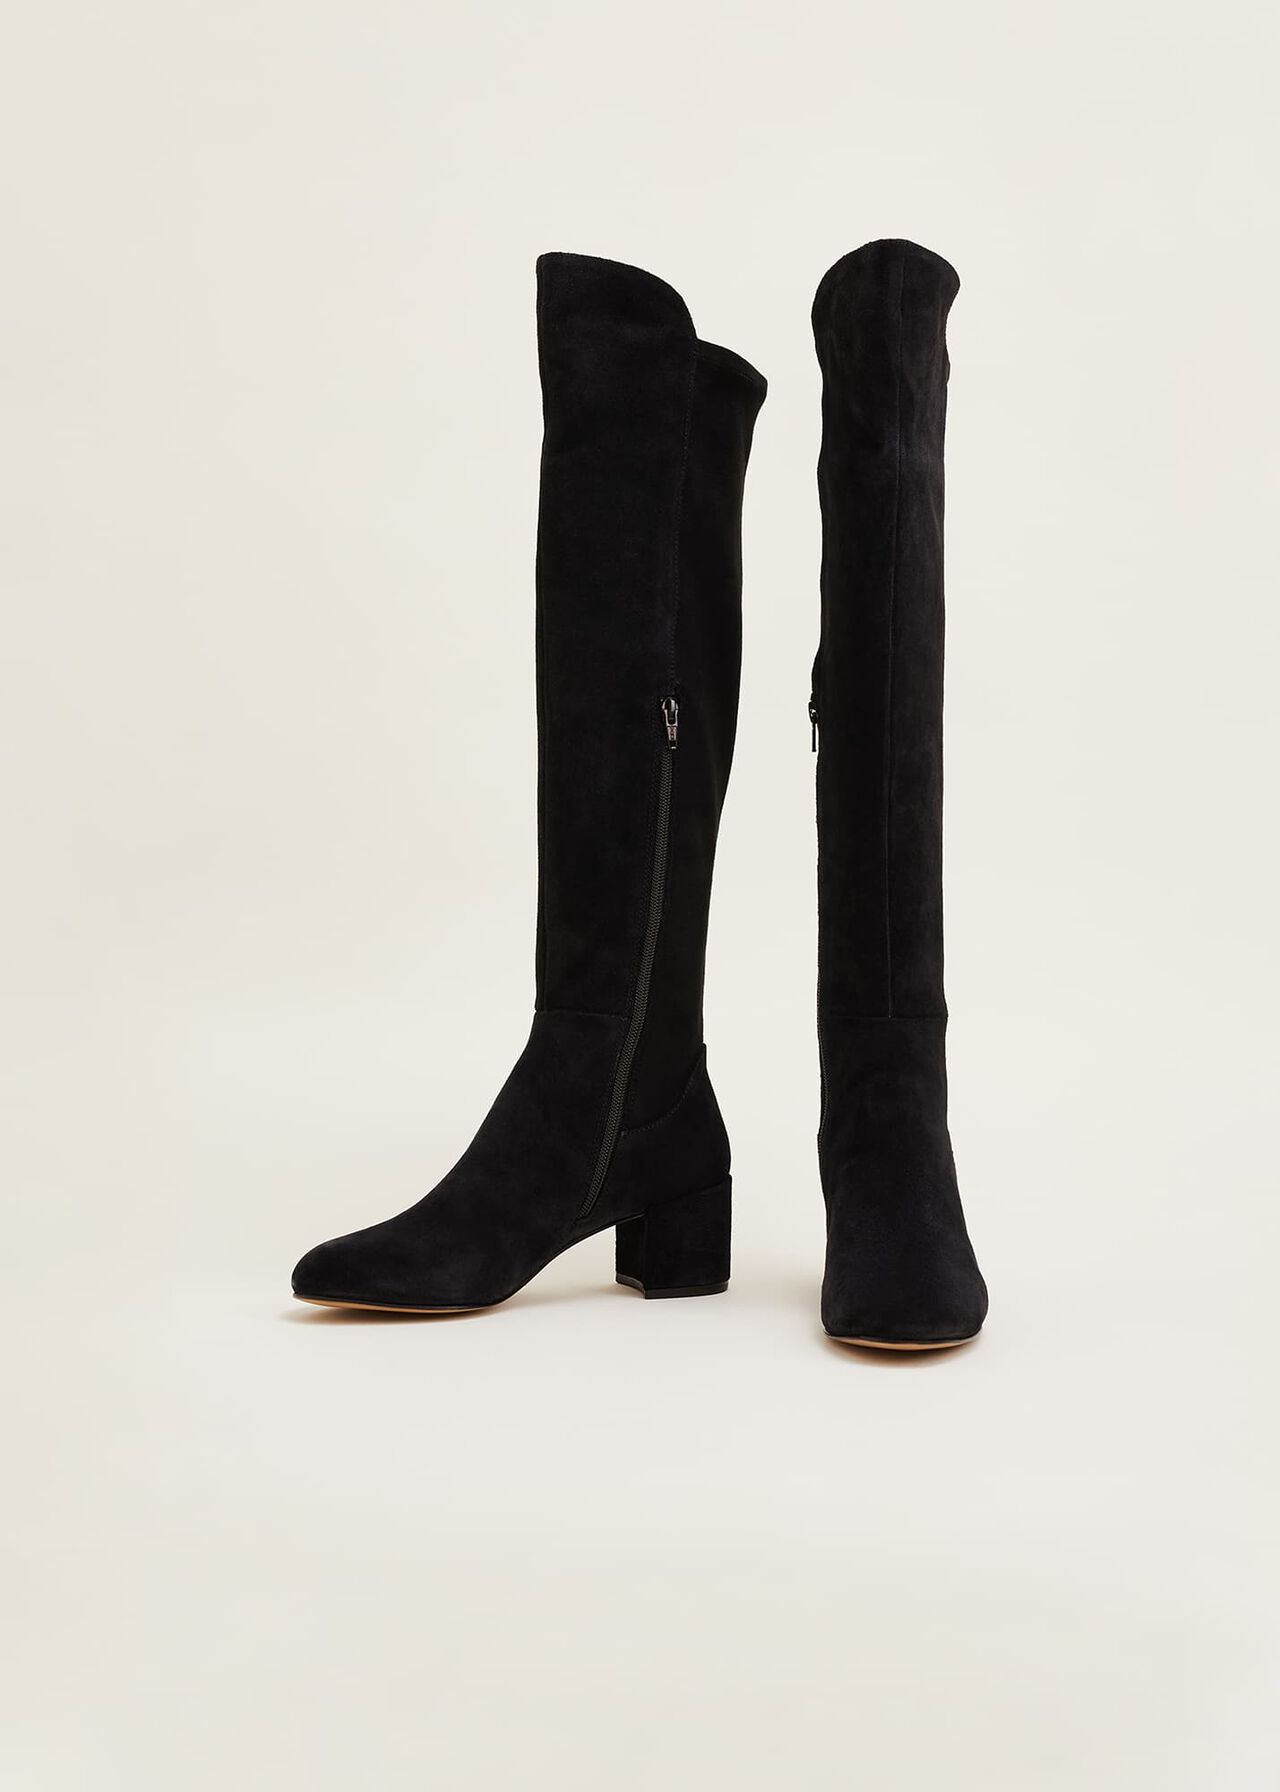 Milly Black Suede Knee Boots